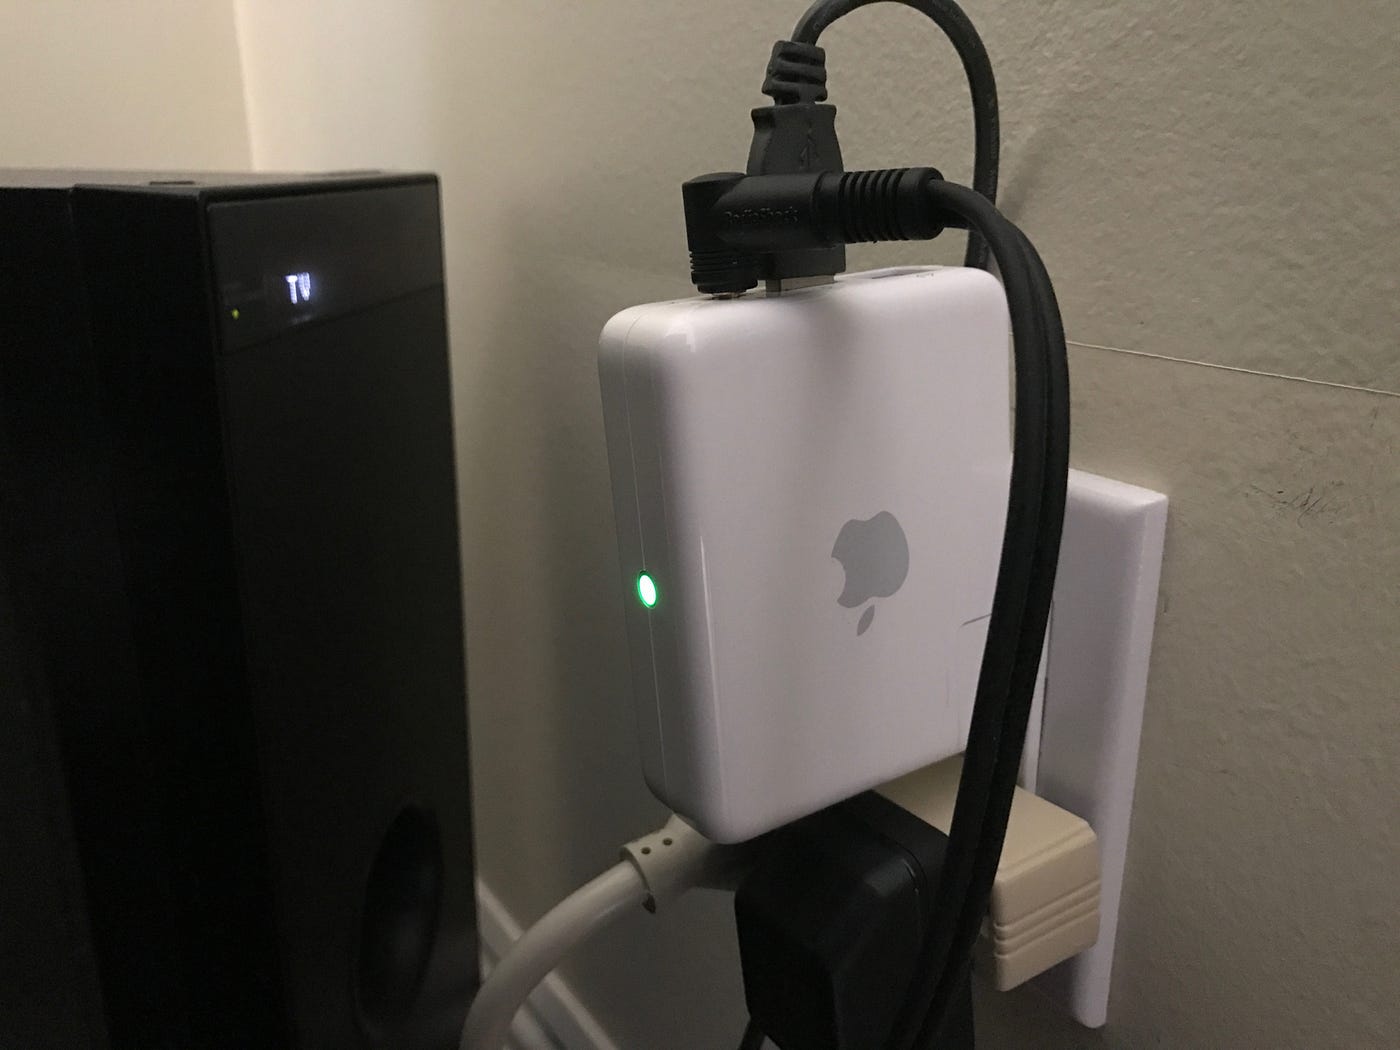 Cheap wireless speakers: How to configure an original AirPort Express  (A1084) on macOS 10.15 Catalina (and older) | by John Ganotis | Medium